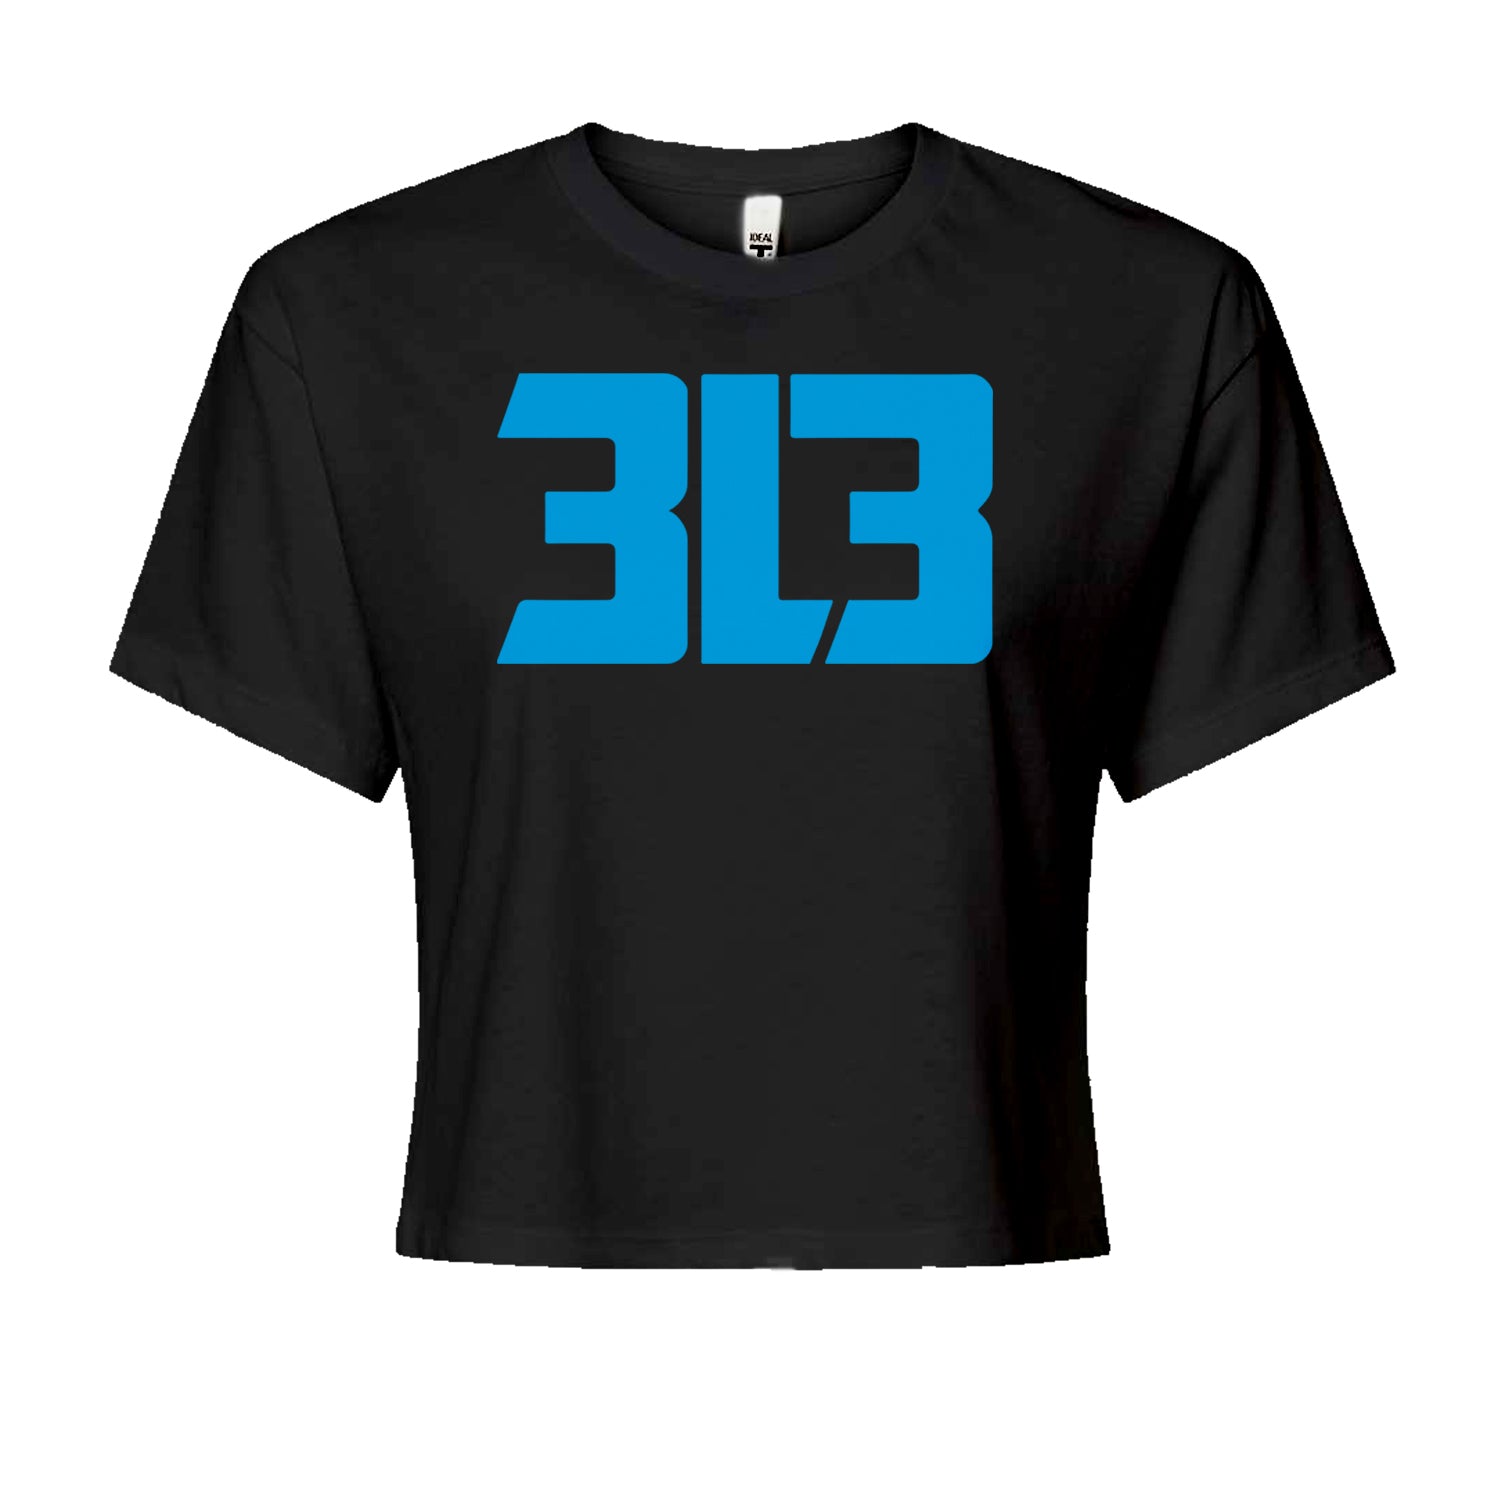 3L3 From The 313 Detroit Football Cropped T-Shirt